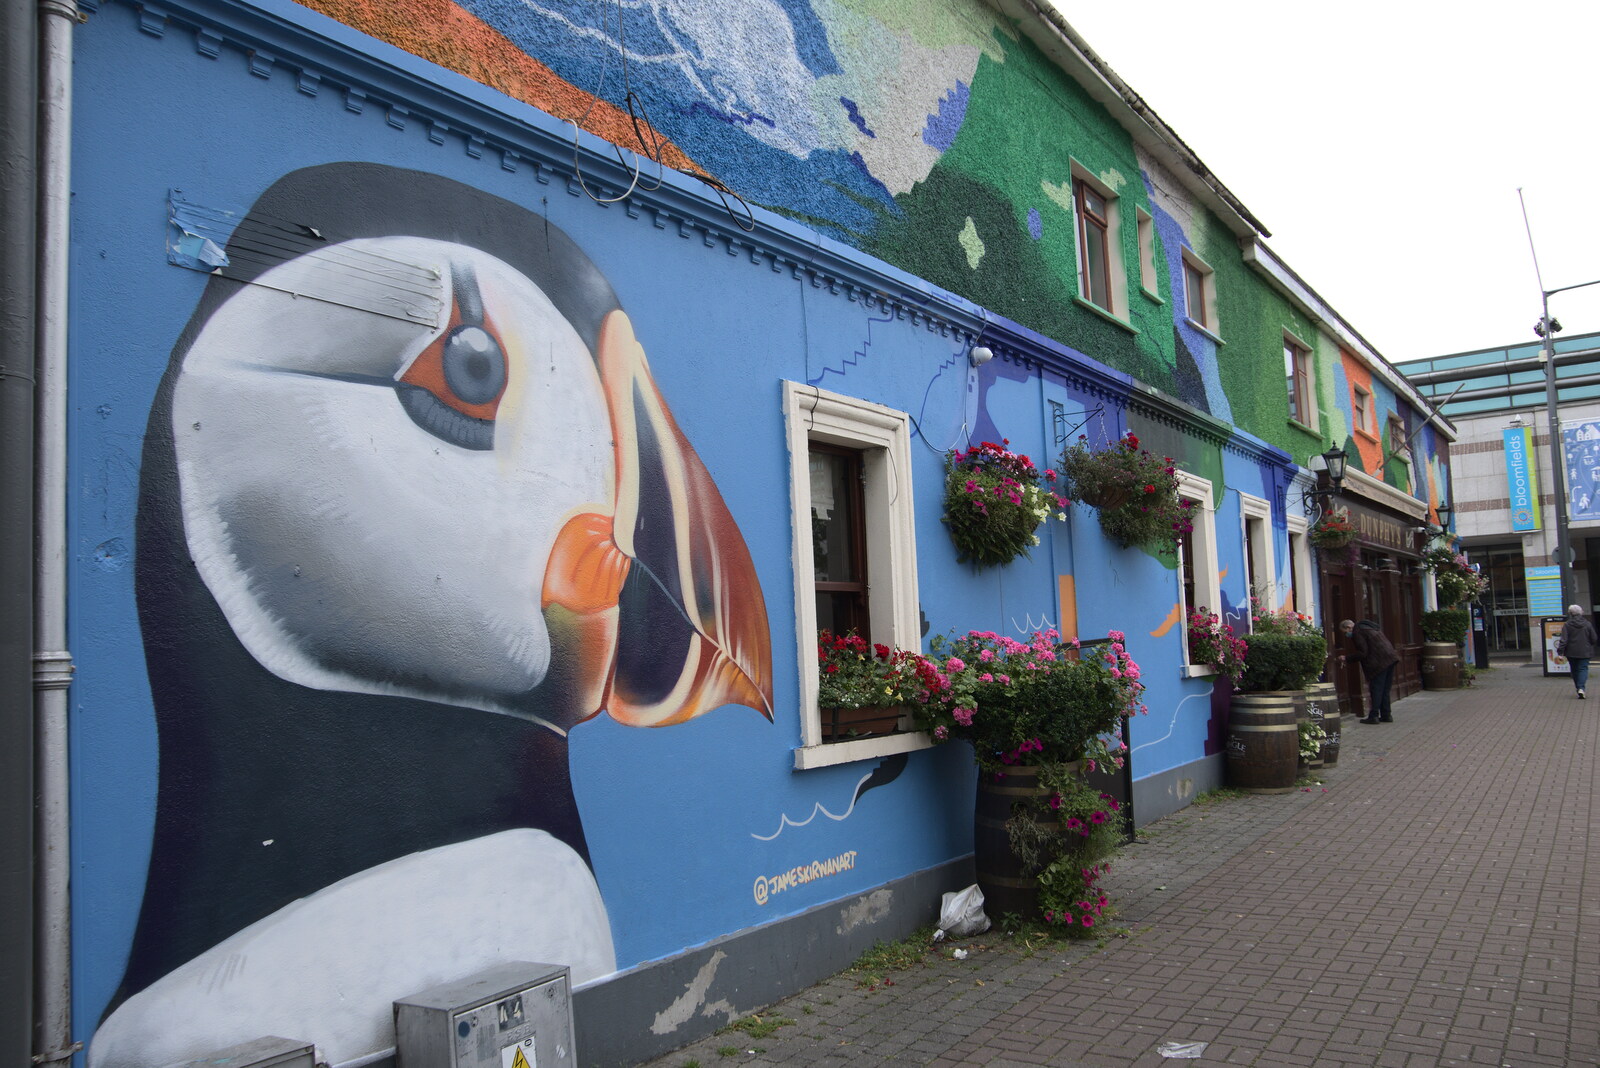 A giant puffin on Dunphy's Bar from Manorhamilton and the Street Art of Dún Laoghaire, Ireland - 15th August 2021